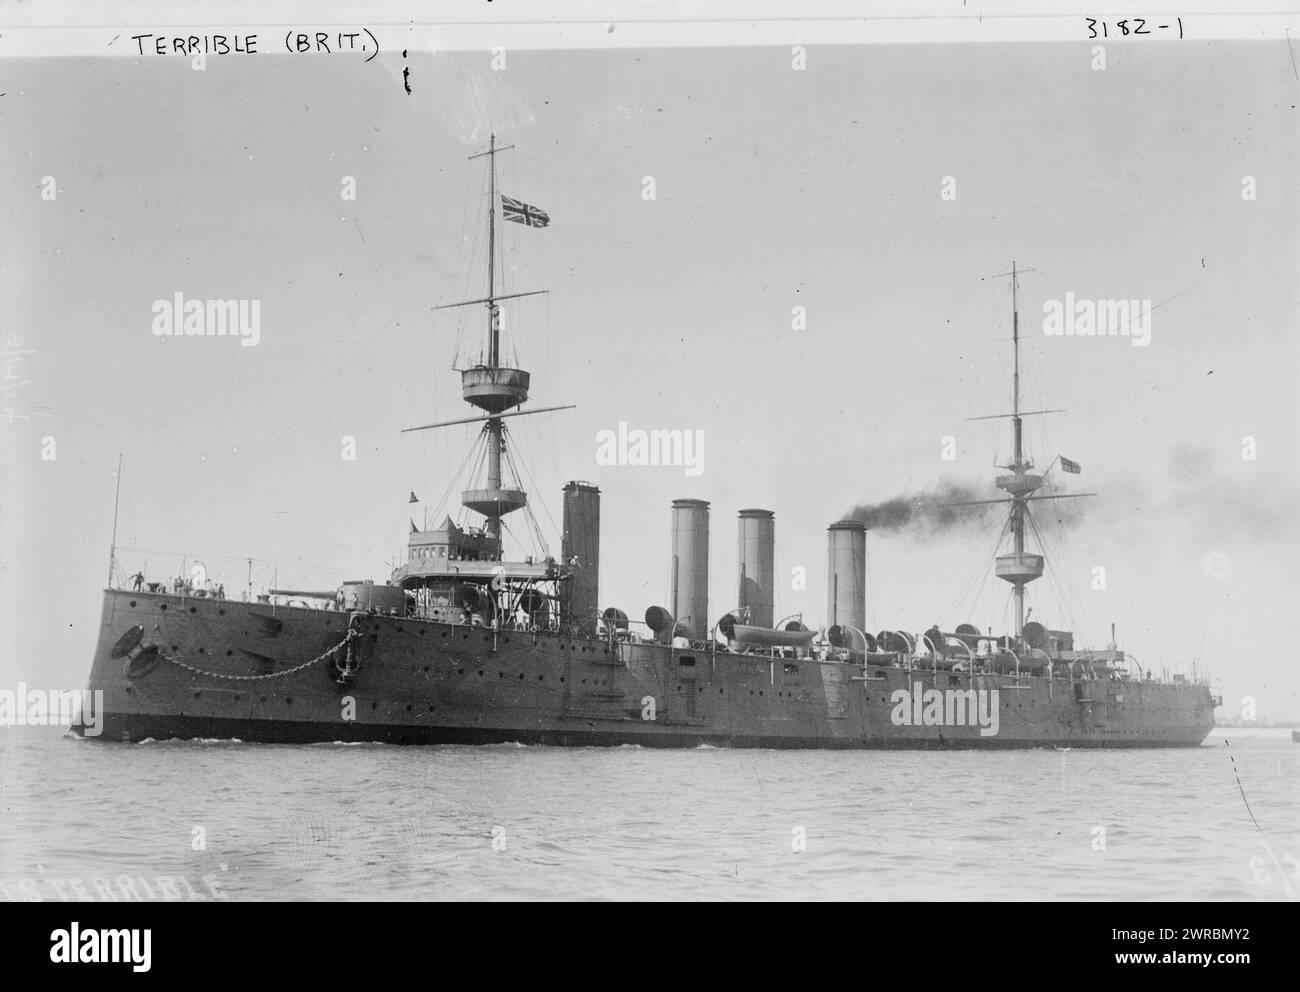 TERRIBLE (Brit.), Photograph shows the British Royal Navy cruiser, the H.M.S. Terrible., between ca. 1910 and ca. 1915, Glass negatives, 1 negative: glass Stock Photo